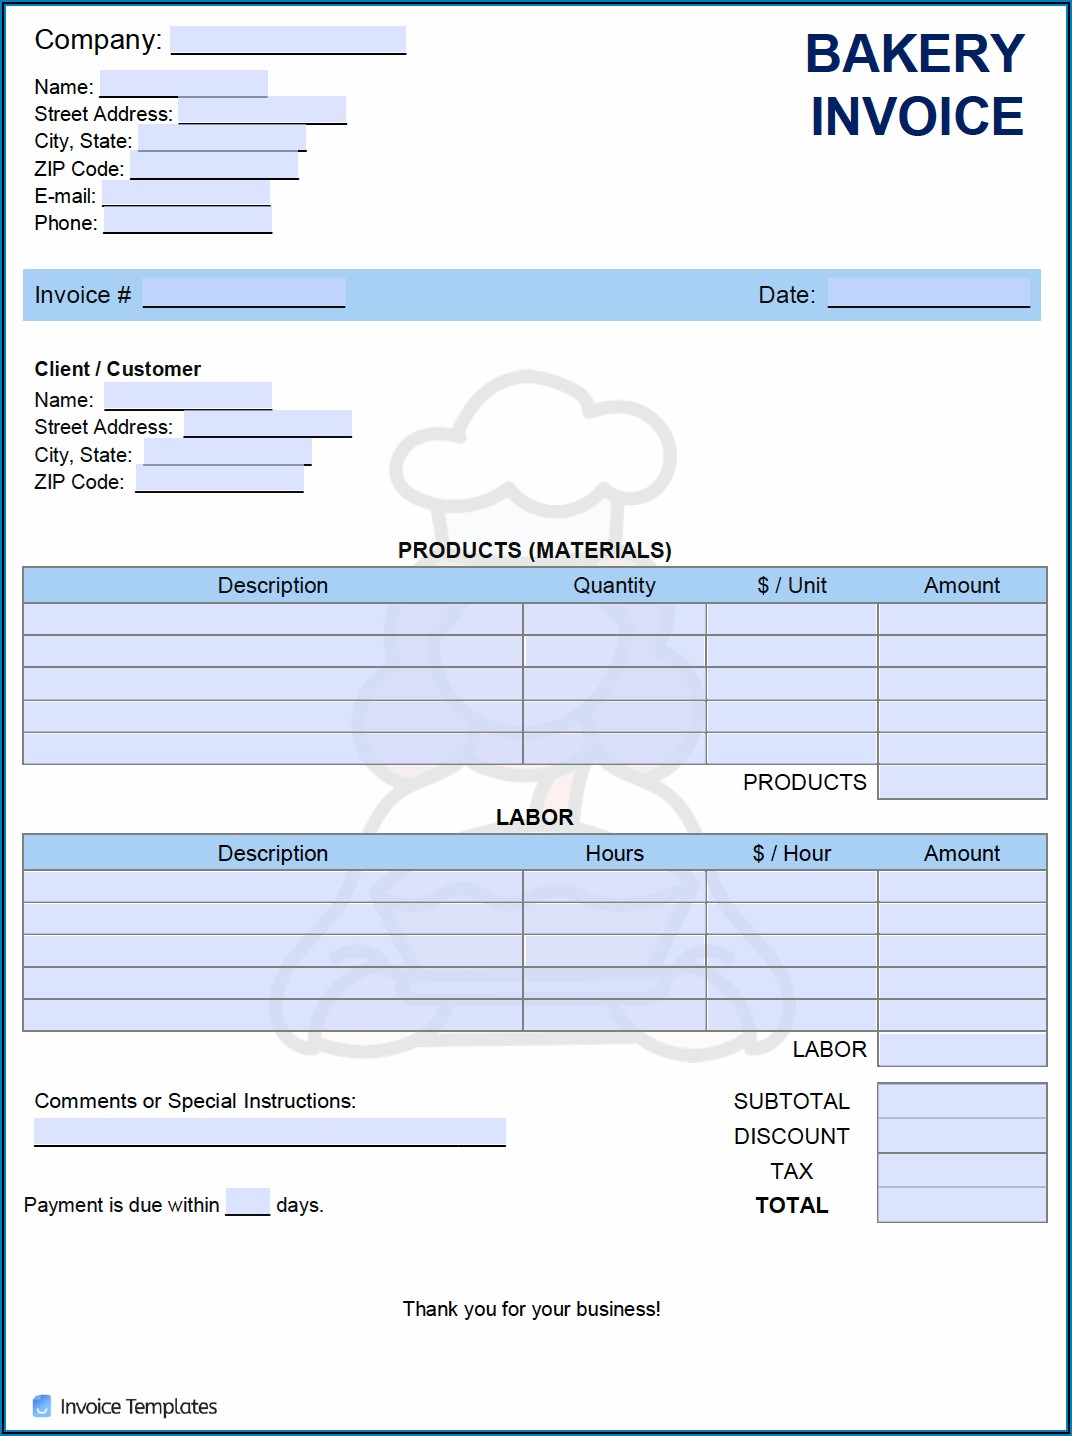 Printable Bakery Invoice Template